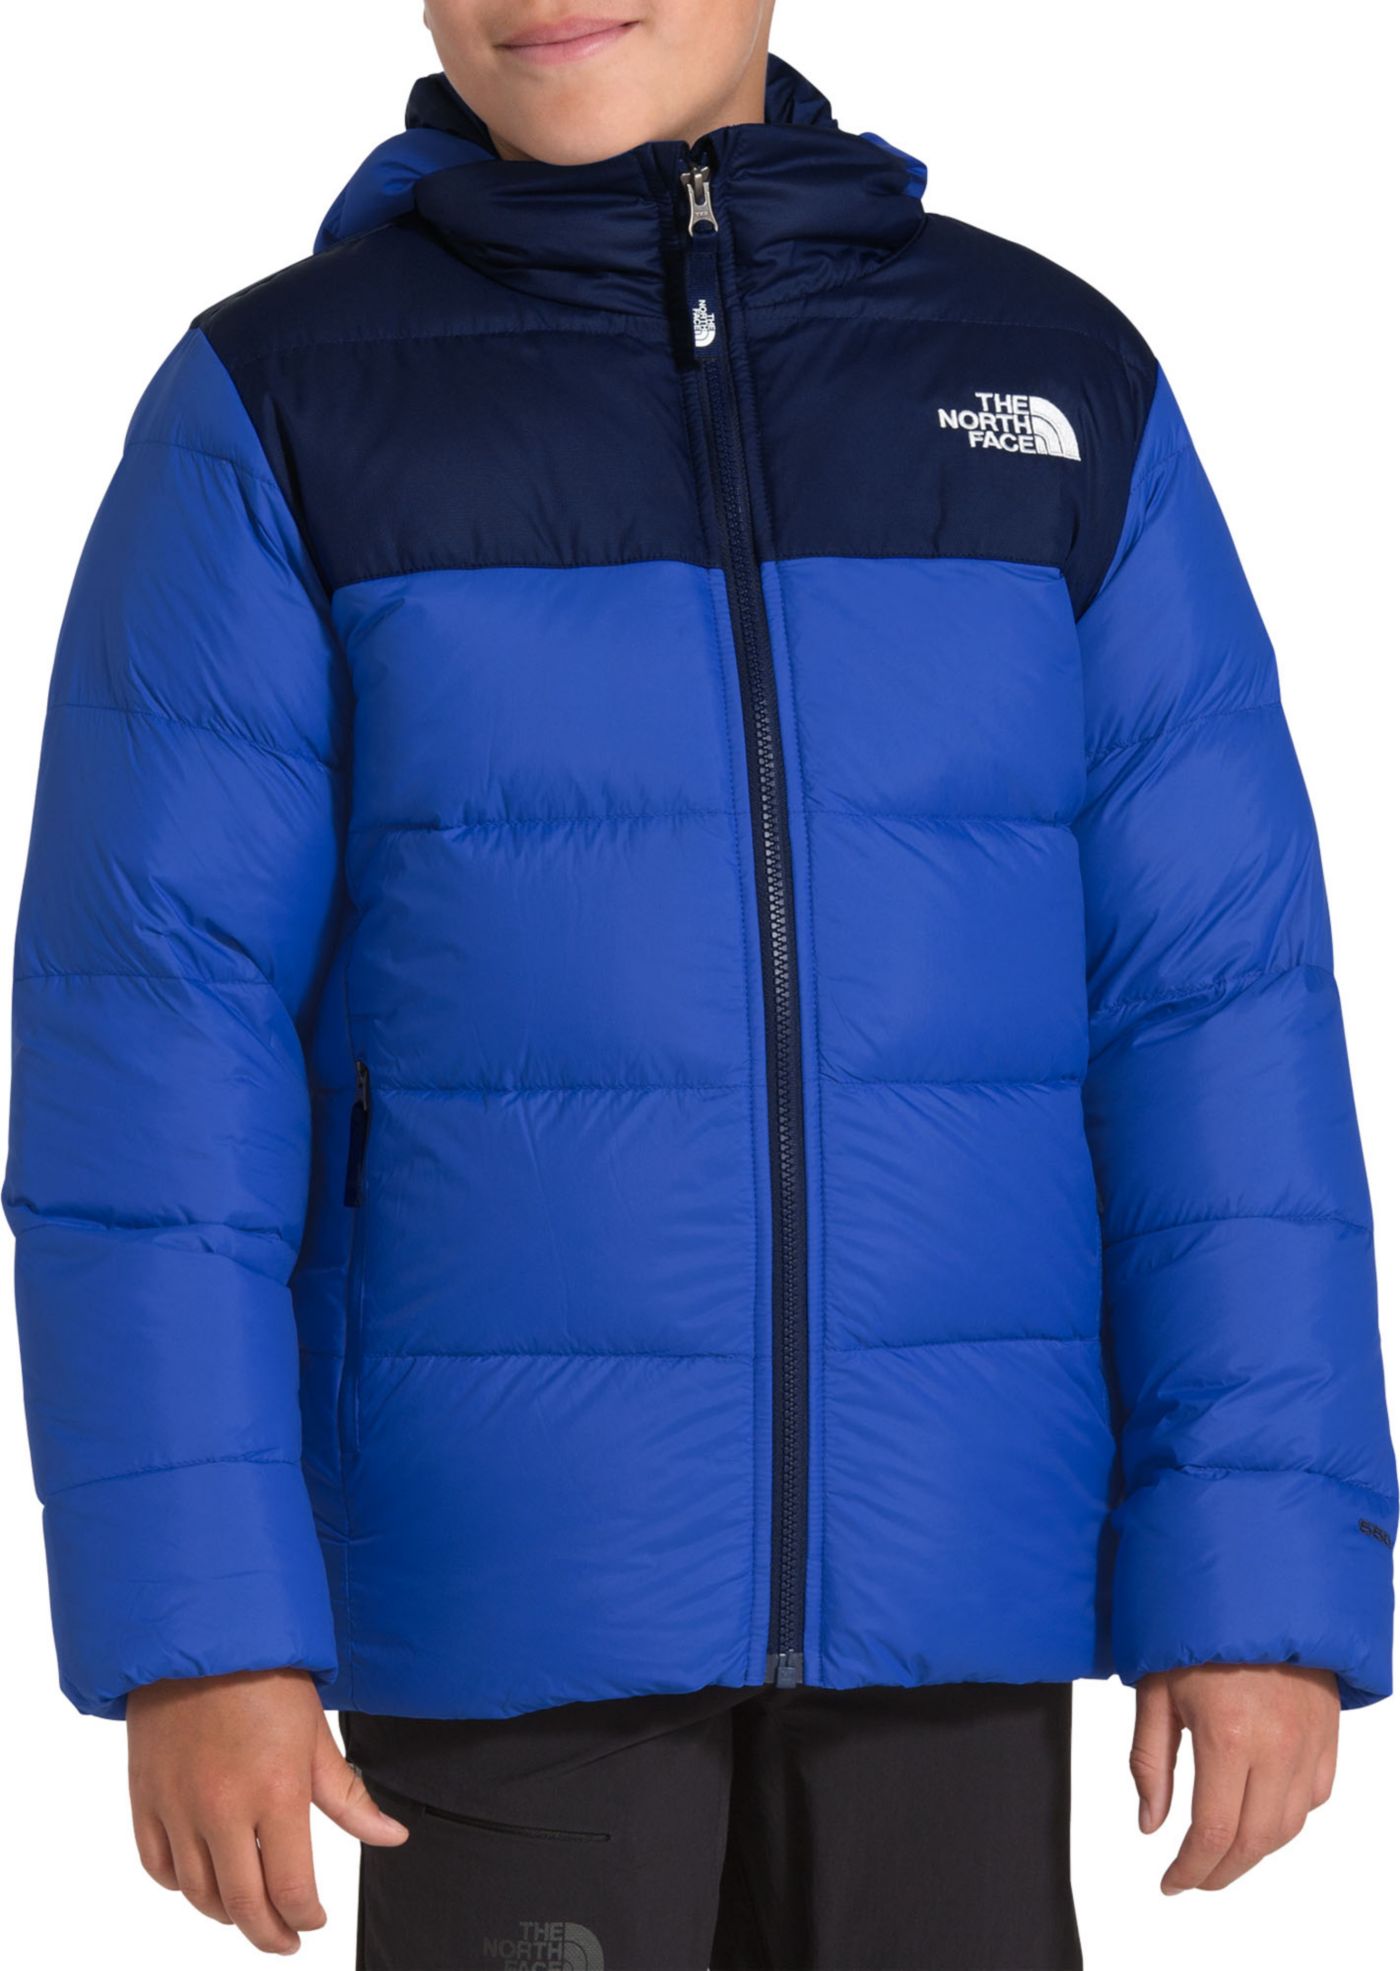 The North Face Boys' Double Down Triclimate Jacket | DICK'S Sporting Goods